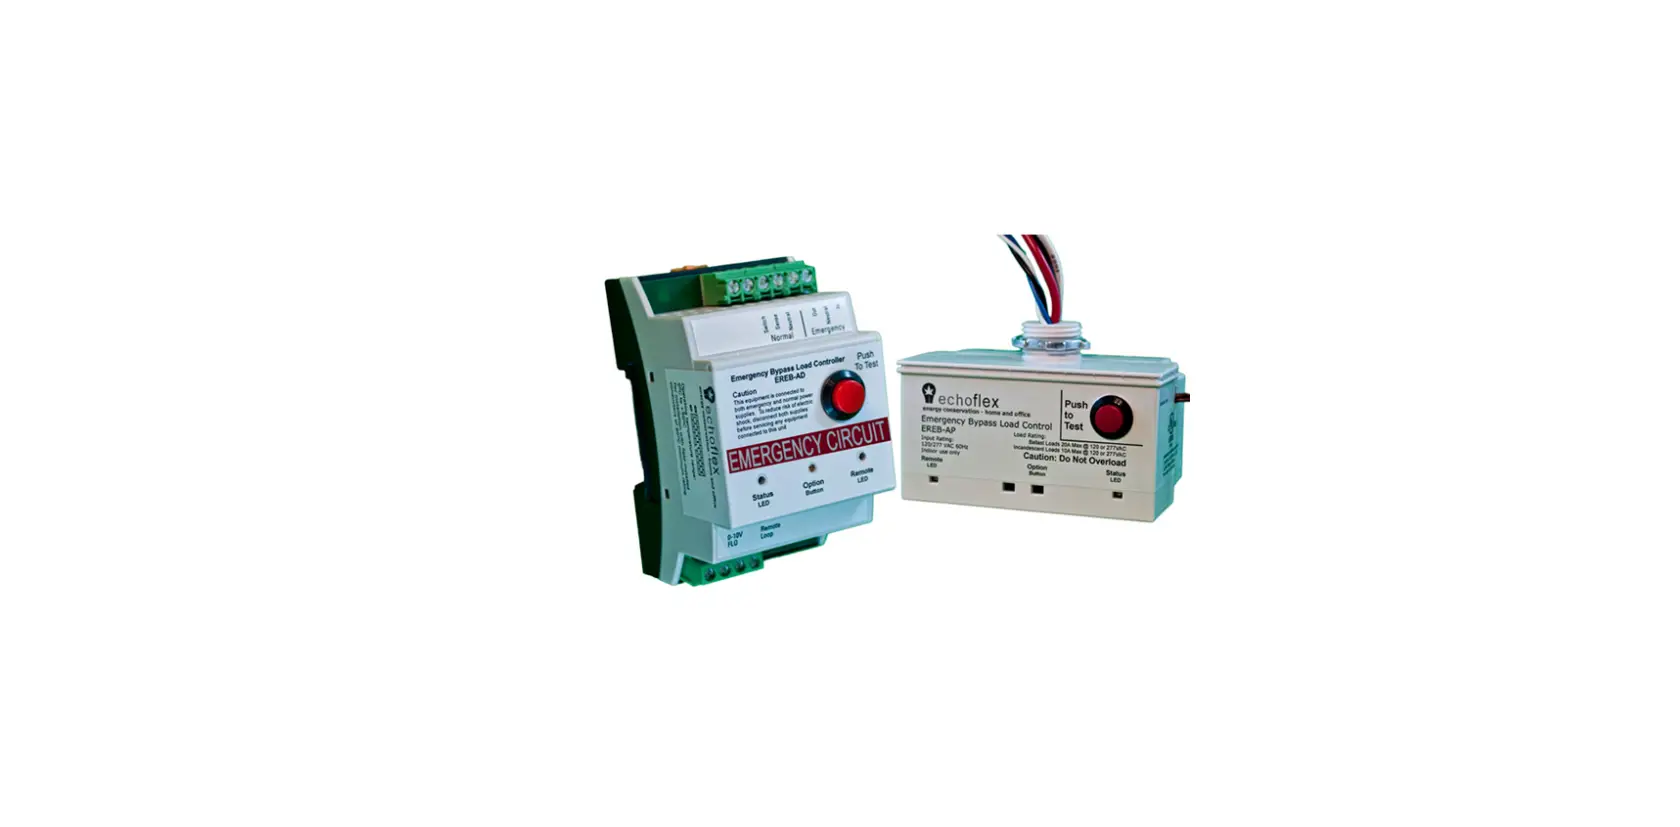 Emergency Bypass Load Controller